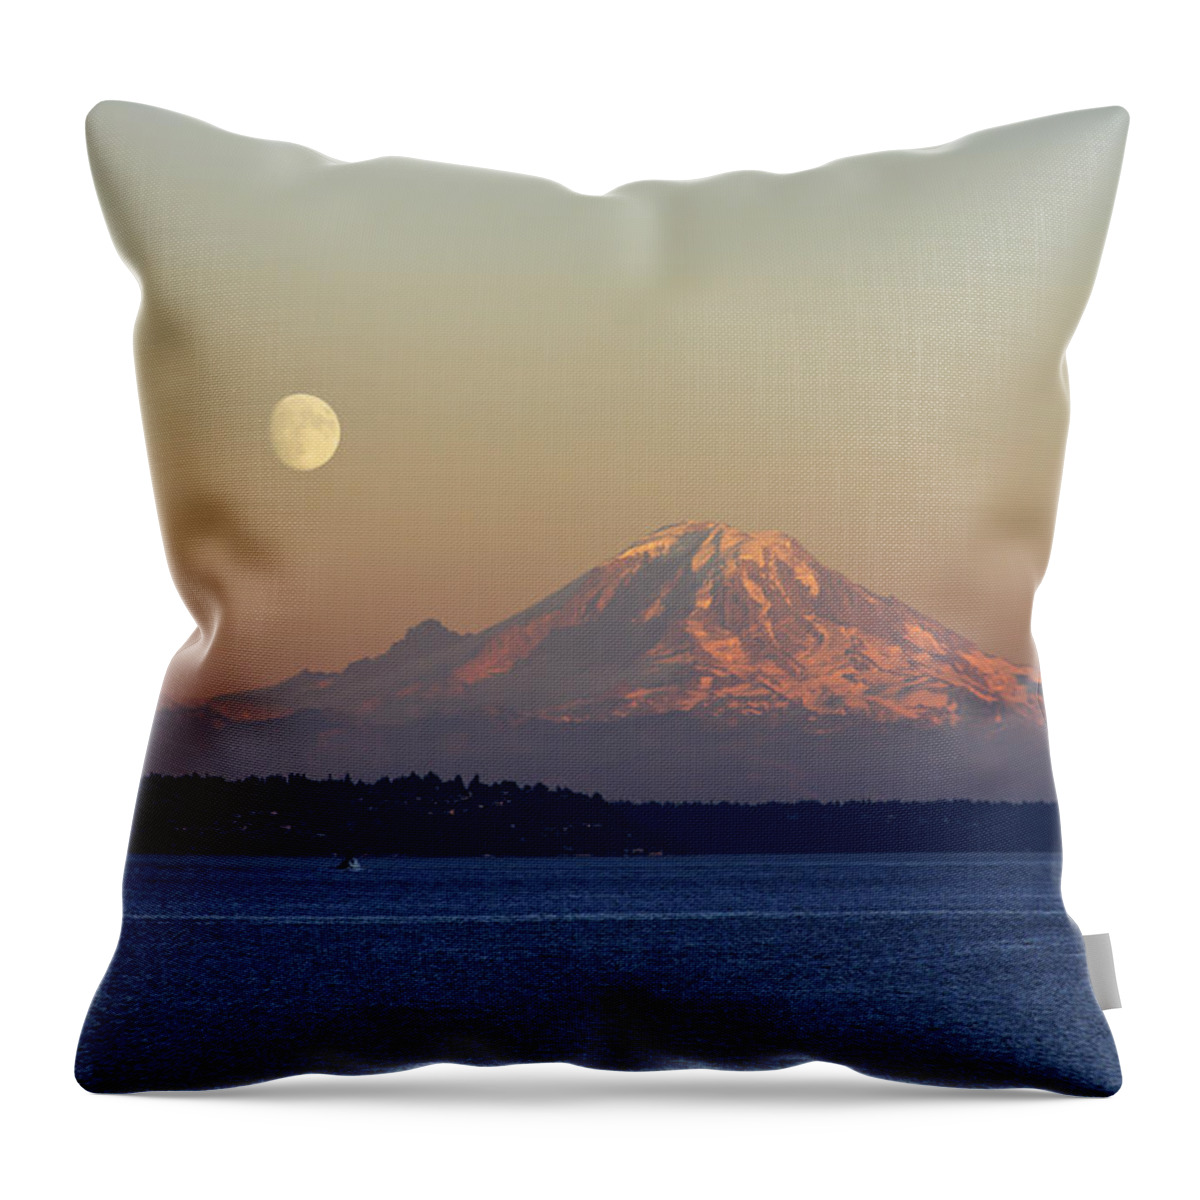 3scape Throw Pillow featuring the photograph Moon Over Rainier by Adam Romanowicz